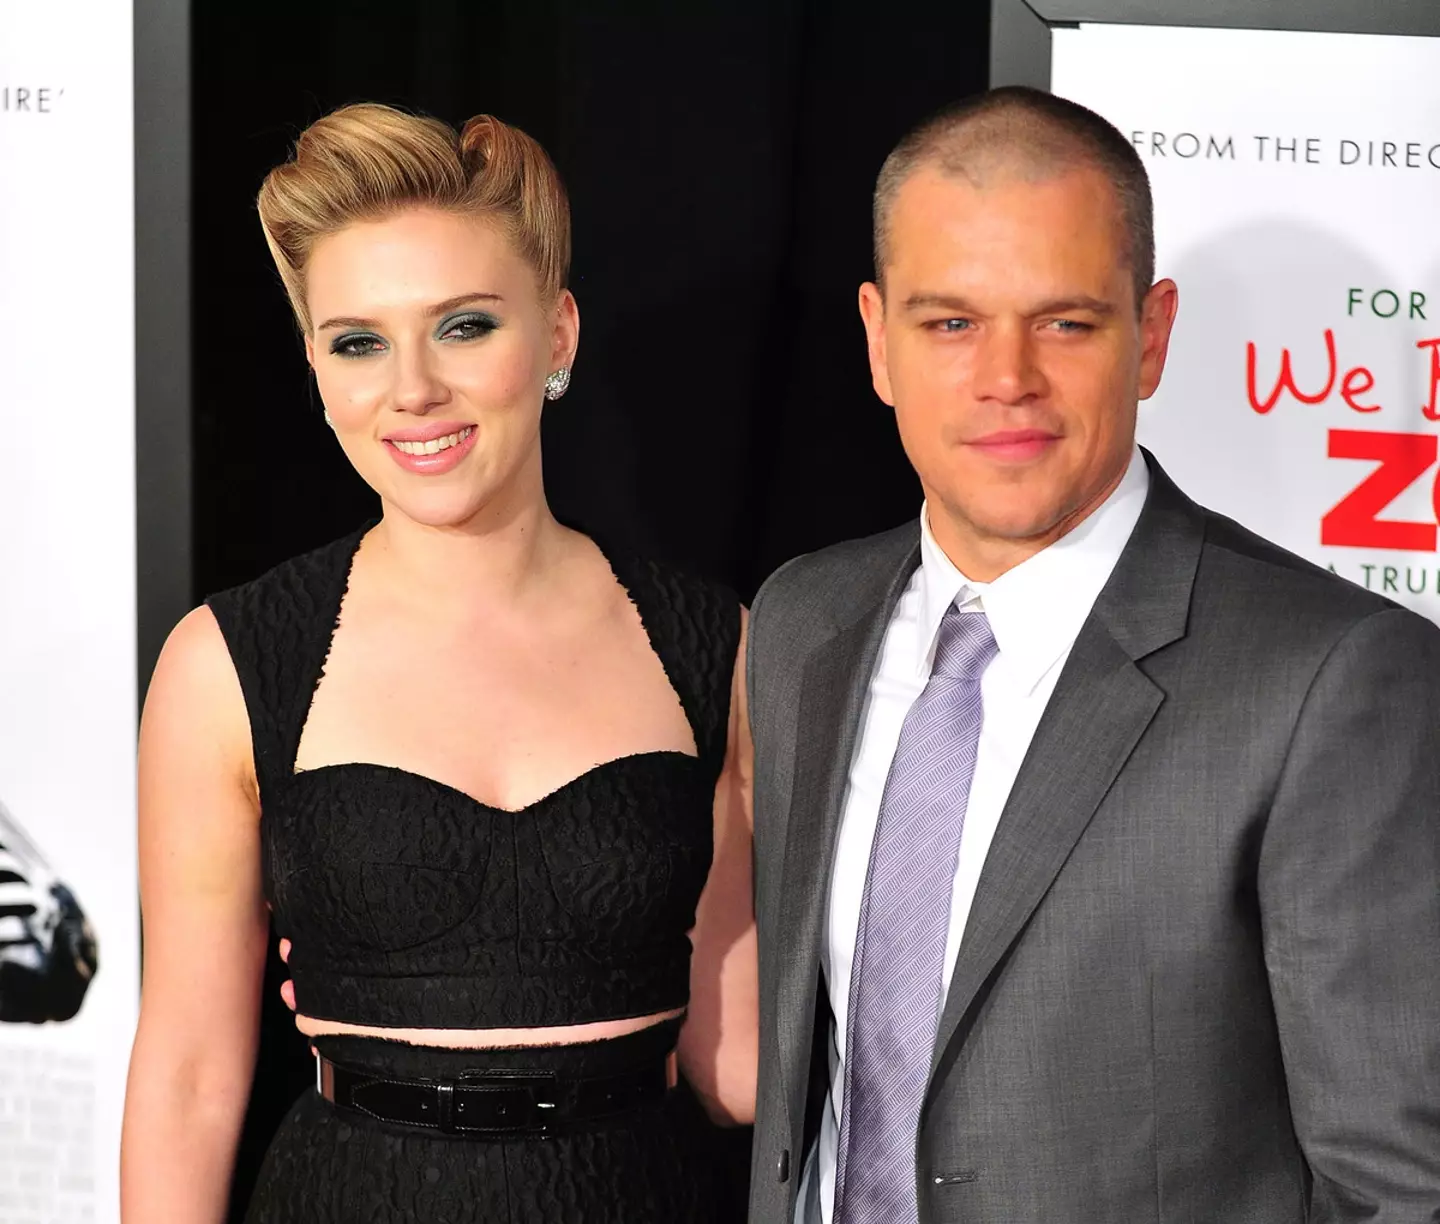 Matt Damon and Scarlett Johansson starred together in We Bought a Zoo.